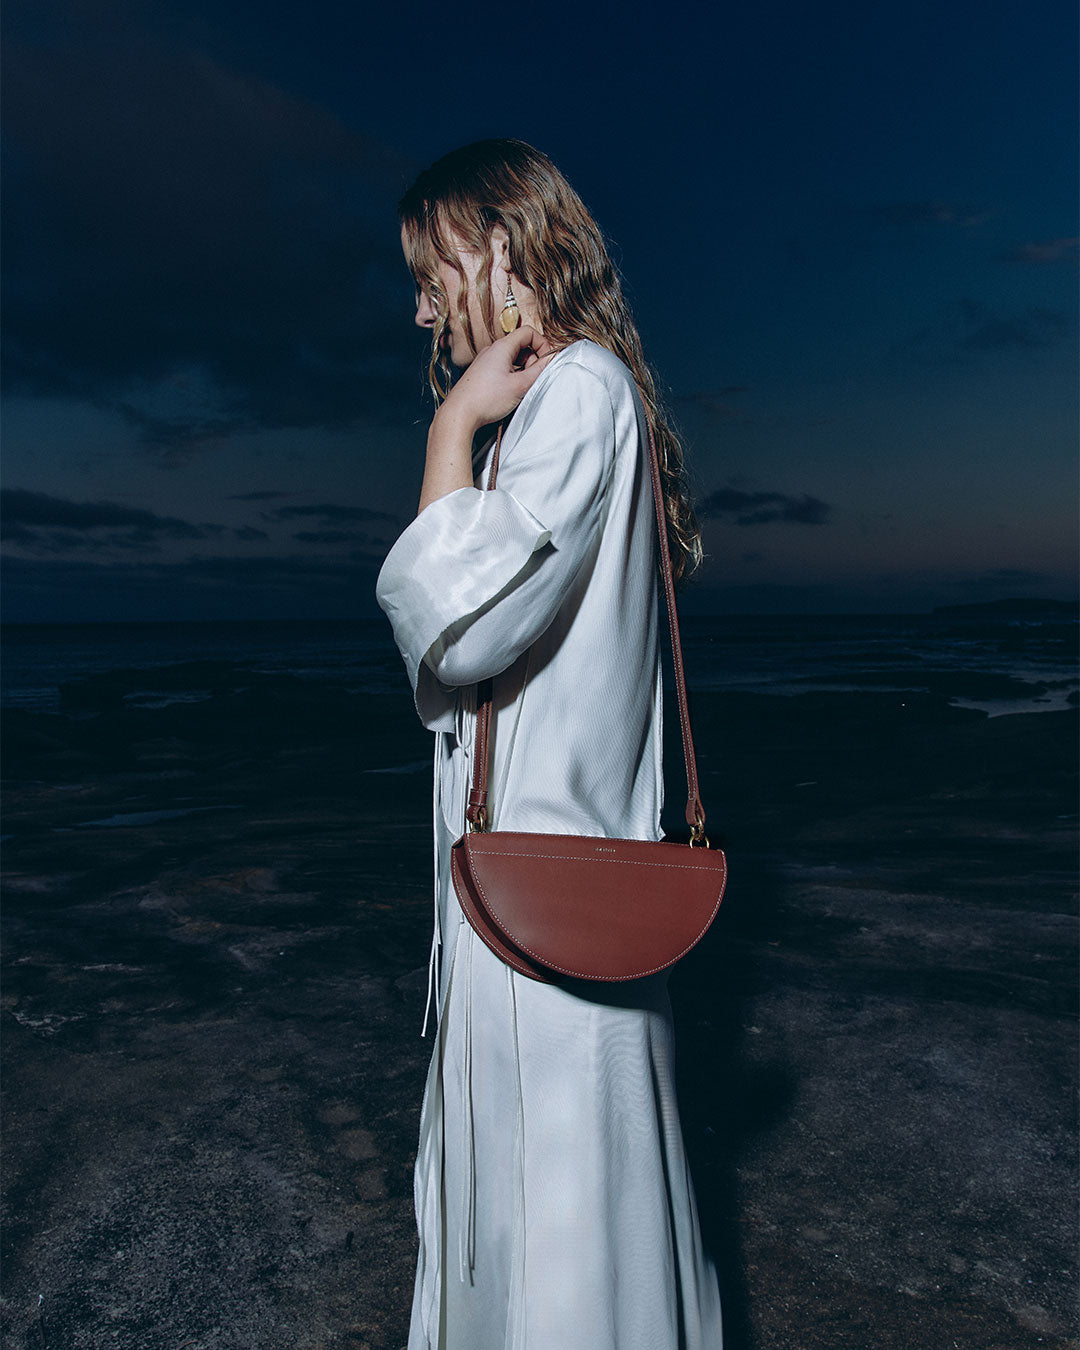 thick lune bag / red rock